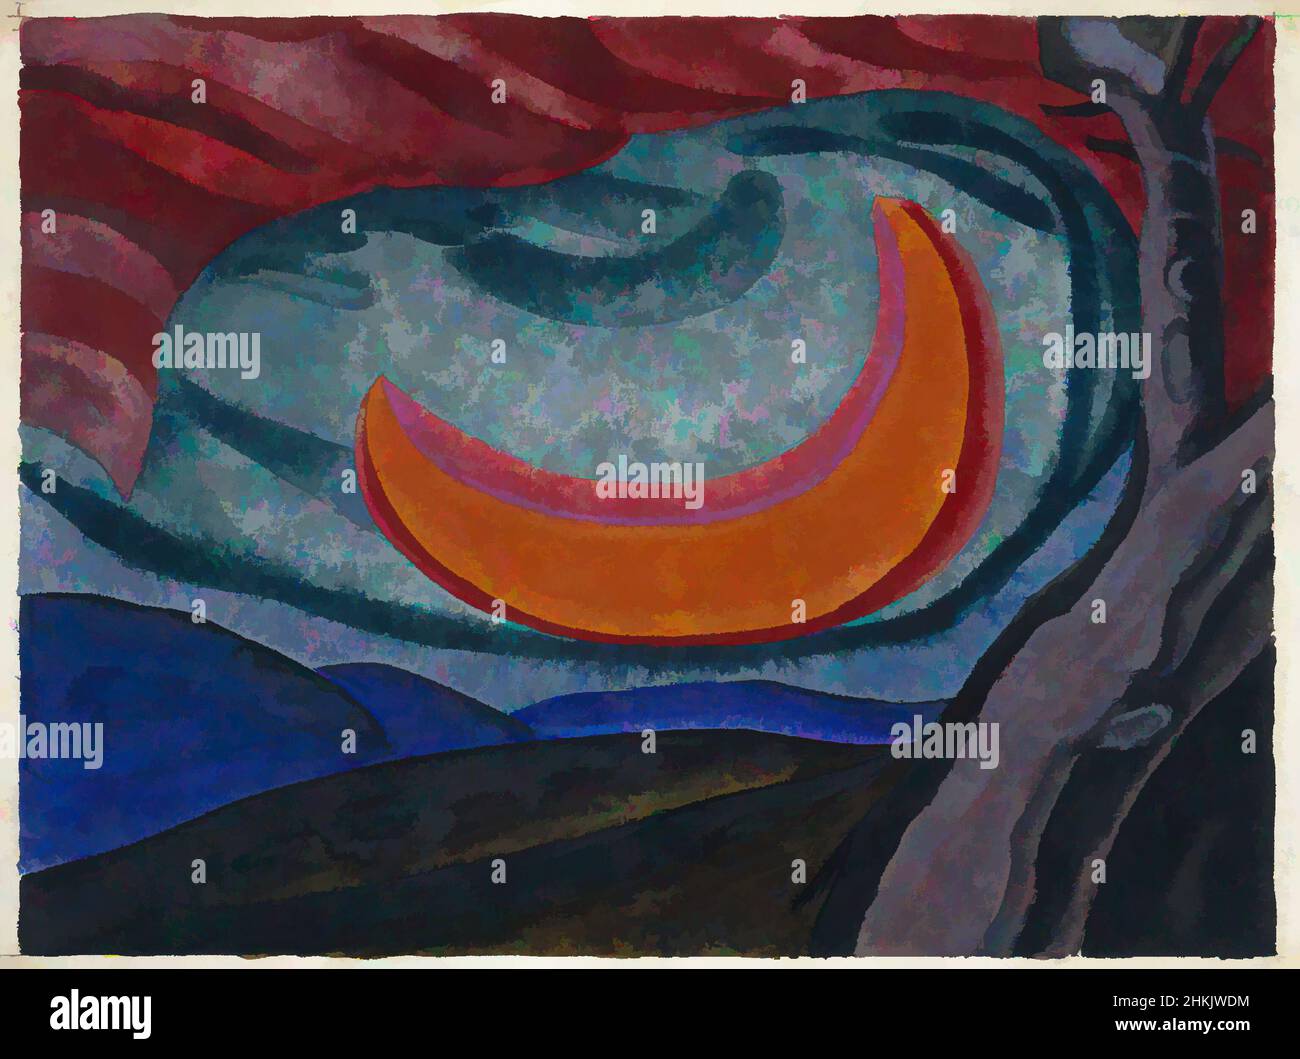 Art inspired by Loving Moon, Oscar Florianus Bluemner, American, born Prussia, 1867-1938, Watercolor, possibly with a surface coating, on cream, medium weight, slightly textured wove paper mounted to thick black woodpulp board, 1927, 9 15/16 x 13 5/16 in., 25.2 x 33.8 cm, Abstract Art, Classic works modernized by Artotop with a splash of modernity. Shapes, color and value, eye-catching visual impact on art. Emotions through freedom of artworks in a contemporary way. A timeless message pursuing a wildly creative new direction. Artists turning to the digital medium and creating the Artotop NFT Stock Photo